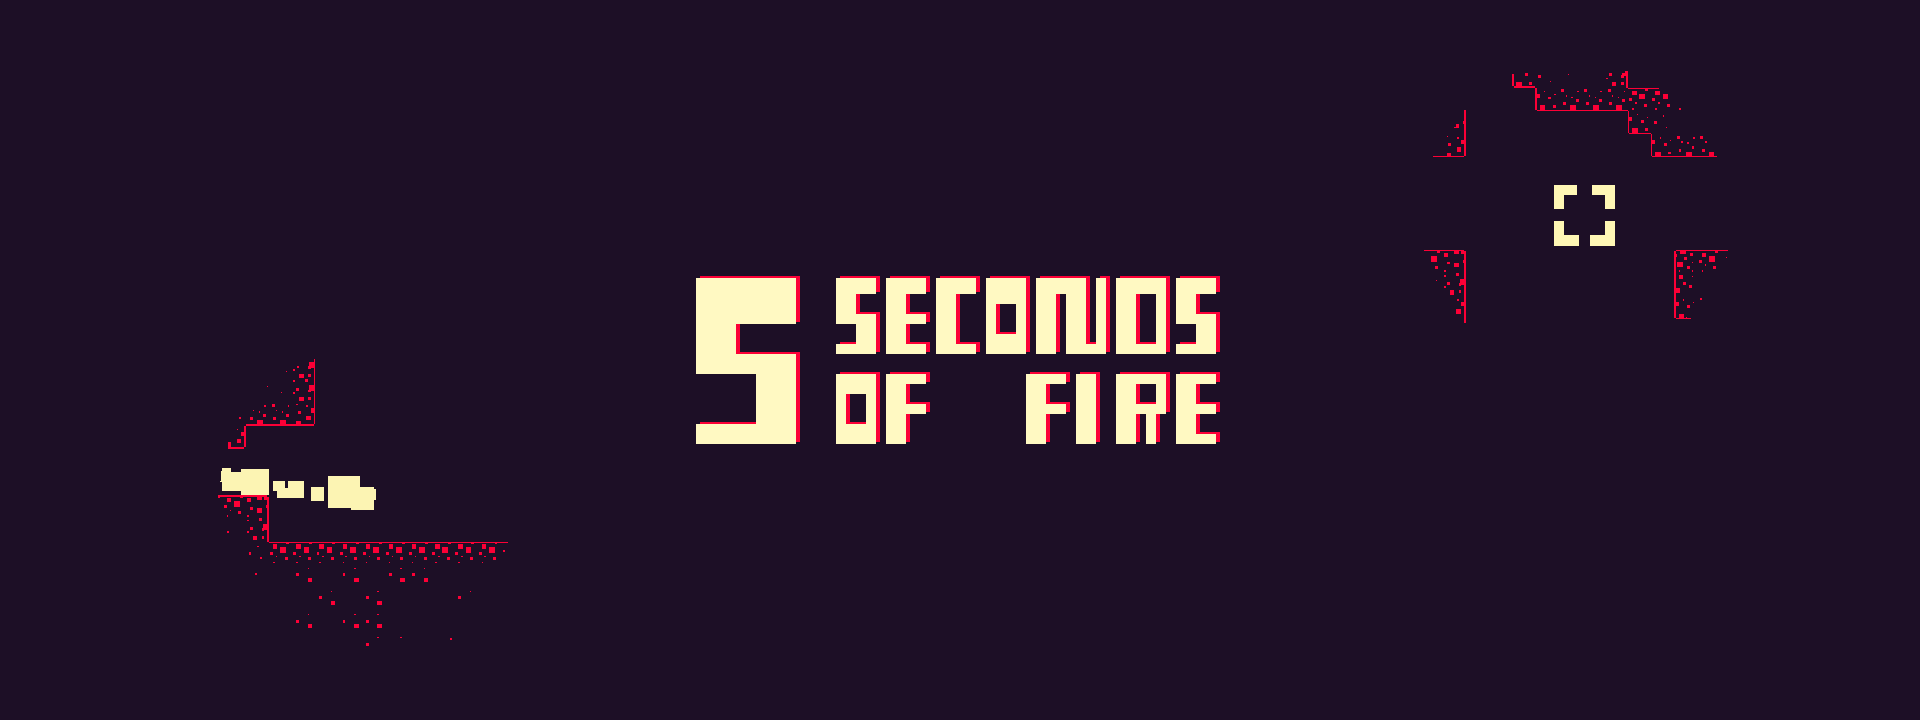 5 seconds of fire